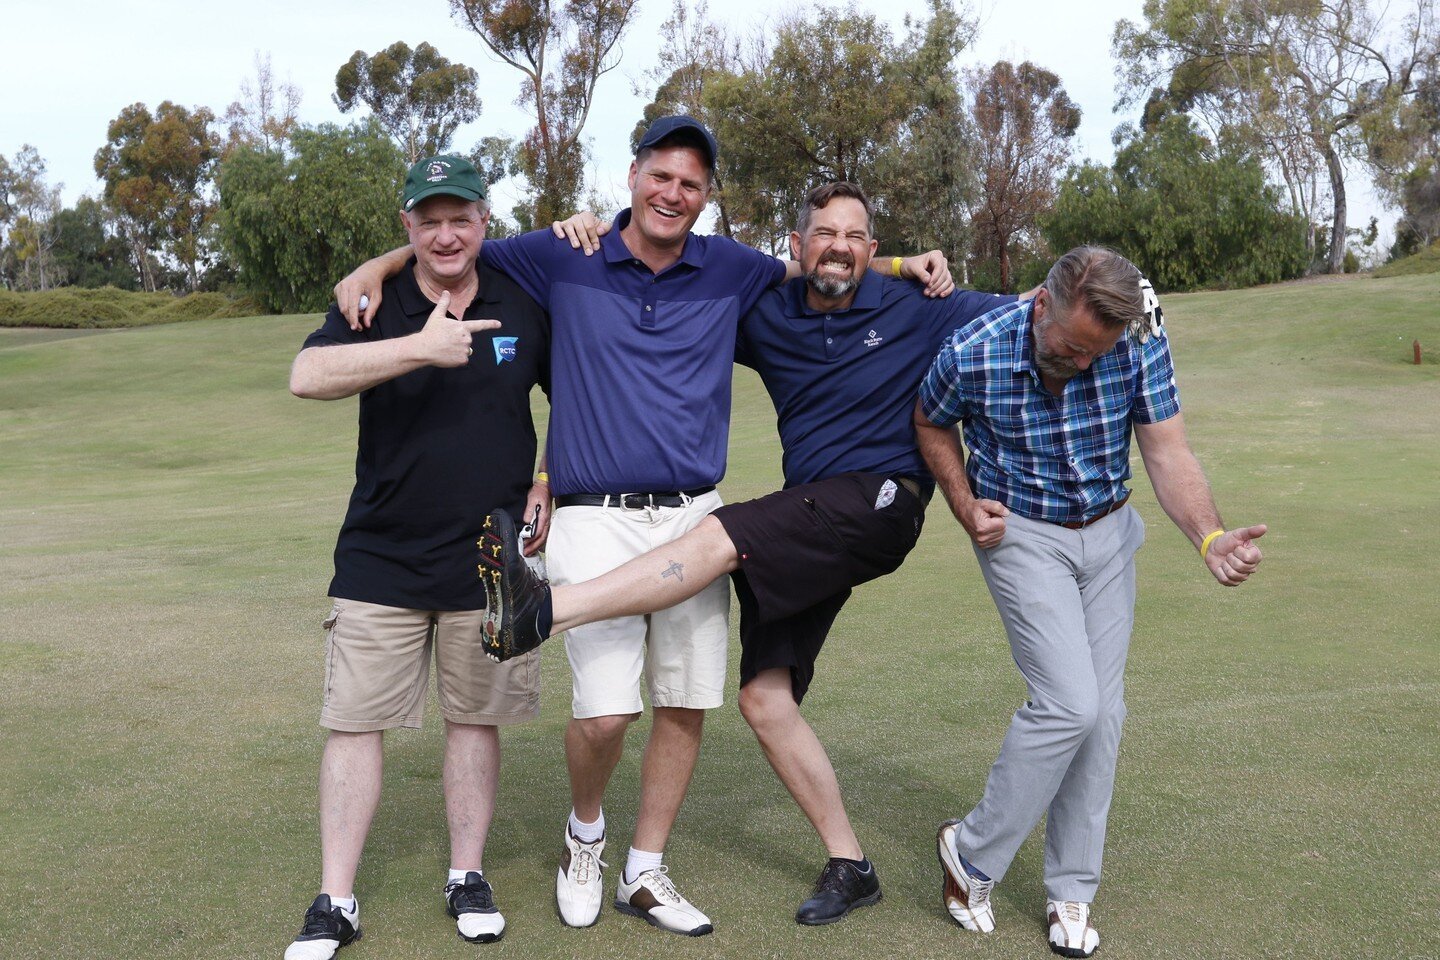 We can't wait until teams from CTF Legacy Sponsor Mark Thomas join us at the SoCal #ctfcharitygolf tournament on 9/28! If you also want to play at the tournament visit https://buff.ly/3MyY64M